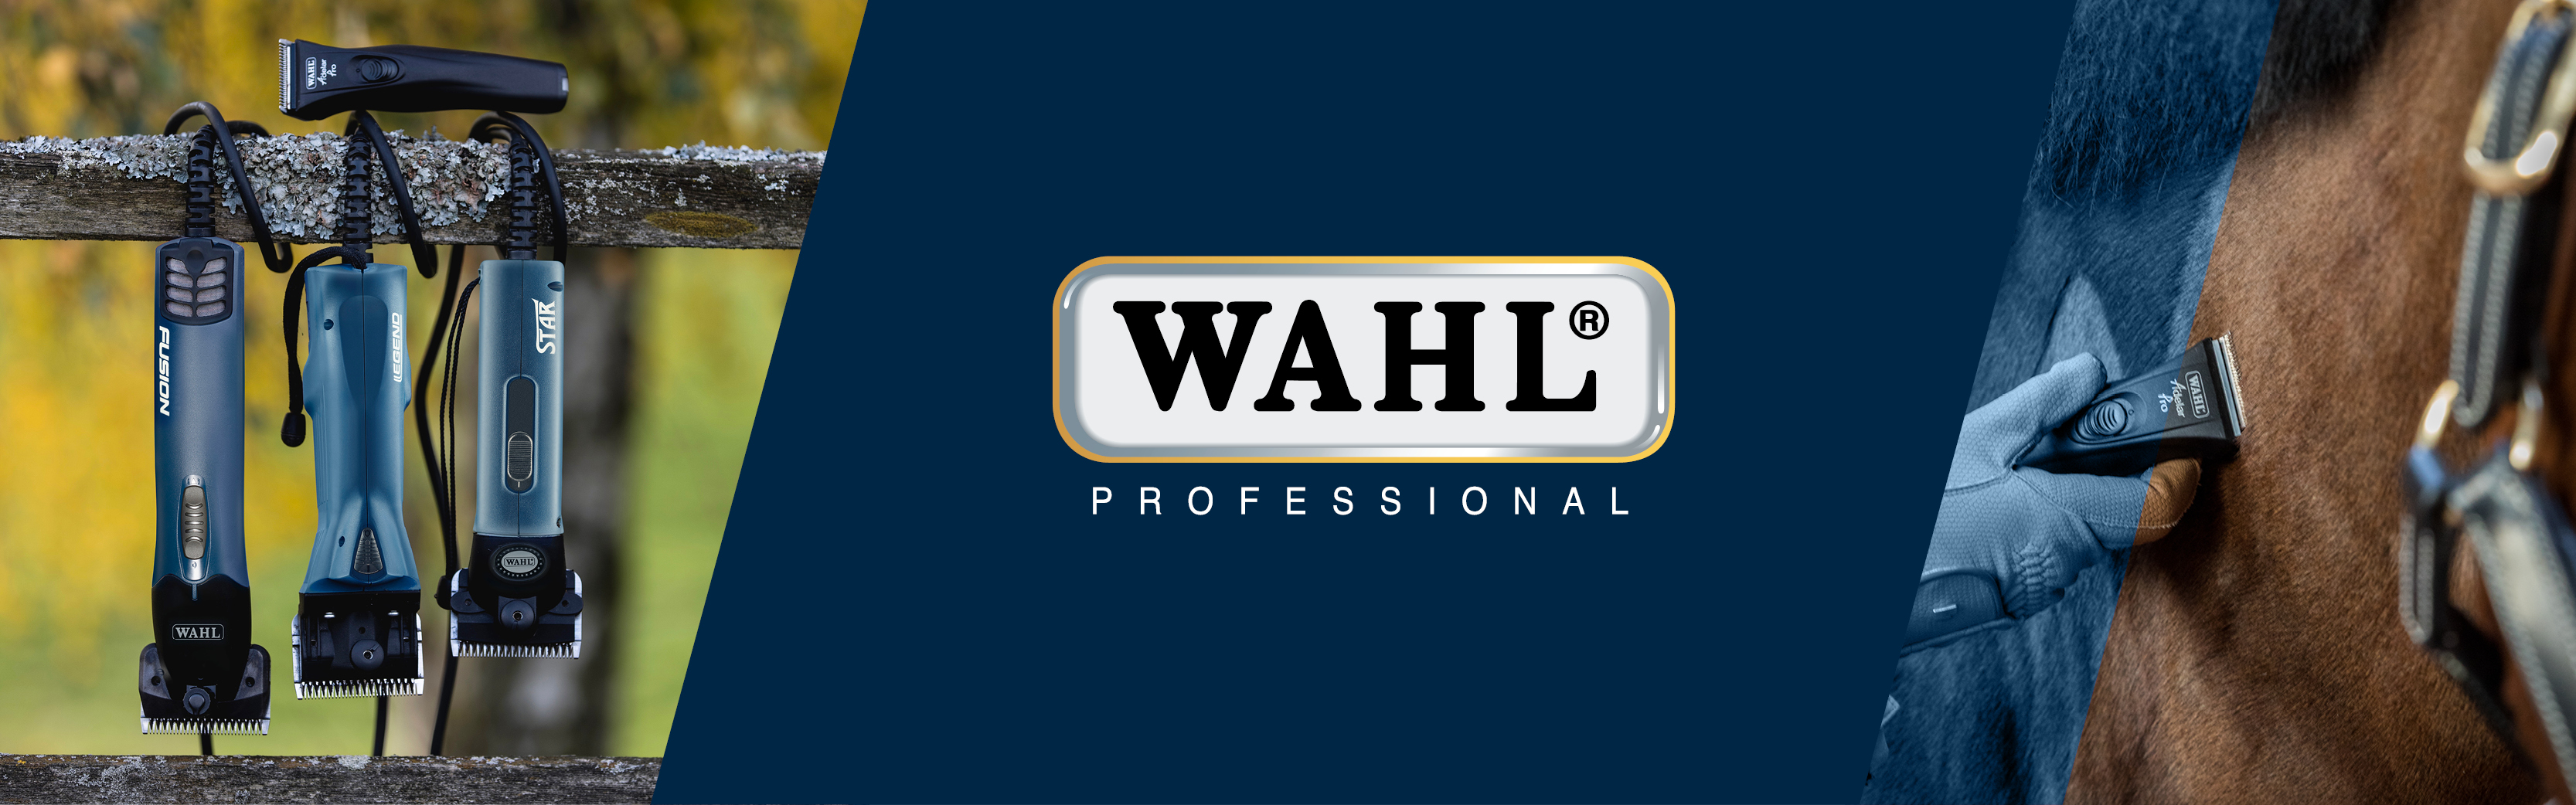 wahl brand from which country